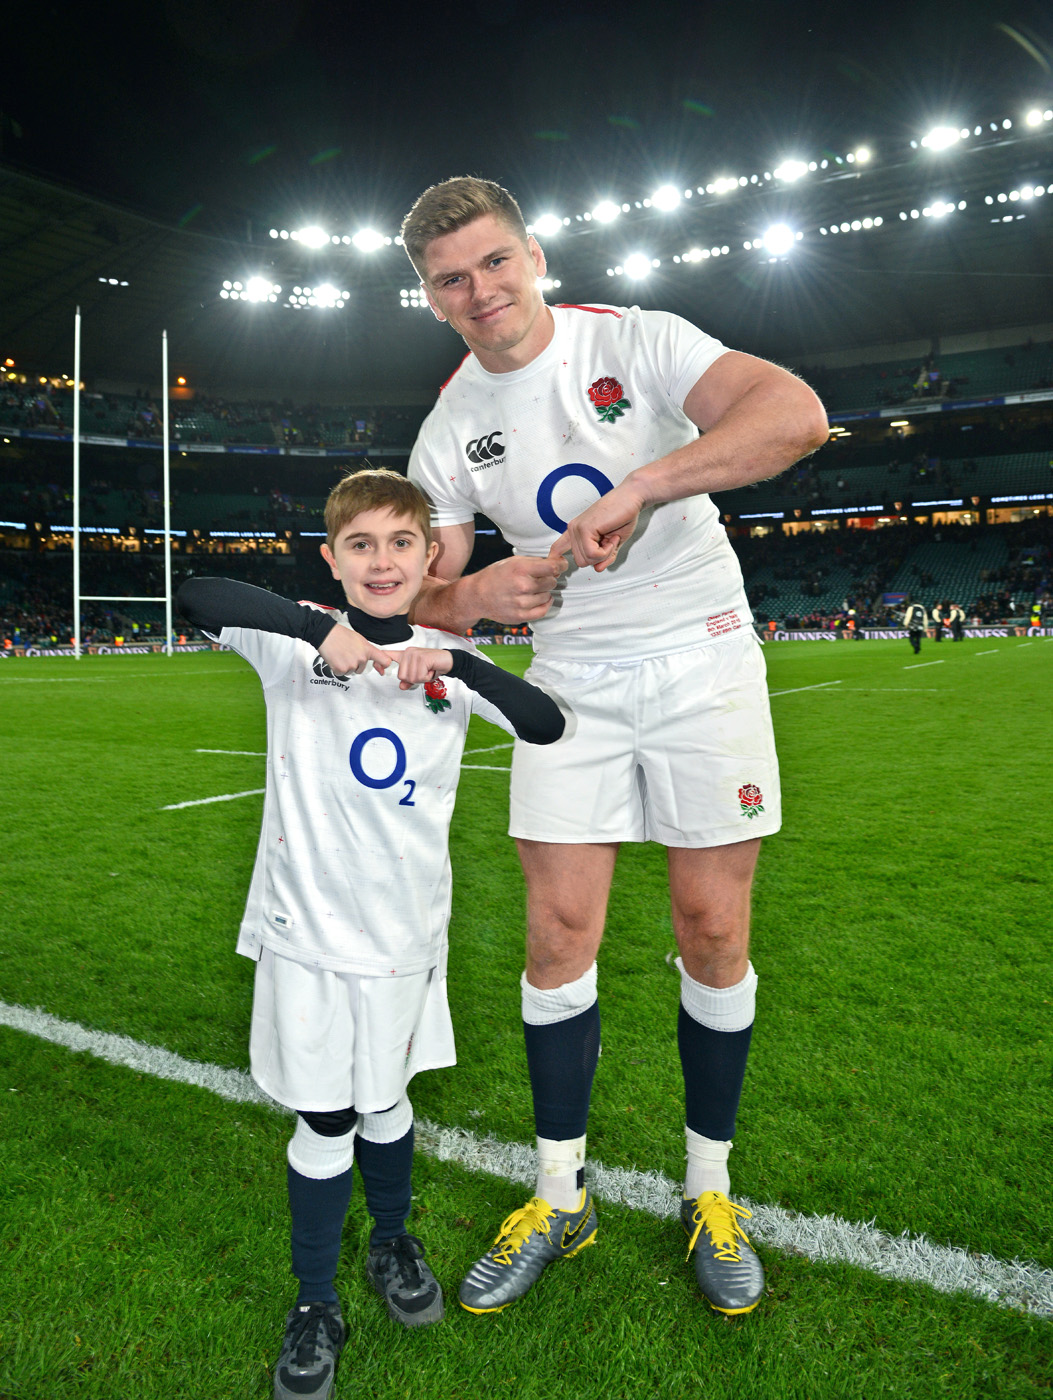 Jack Johnson with rugby player Owen Farrell doing the 'JJ' salute